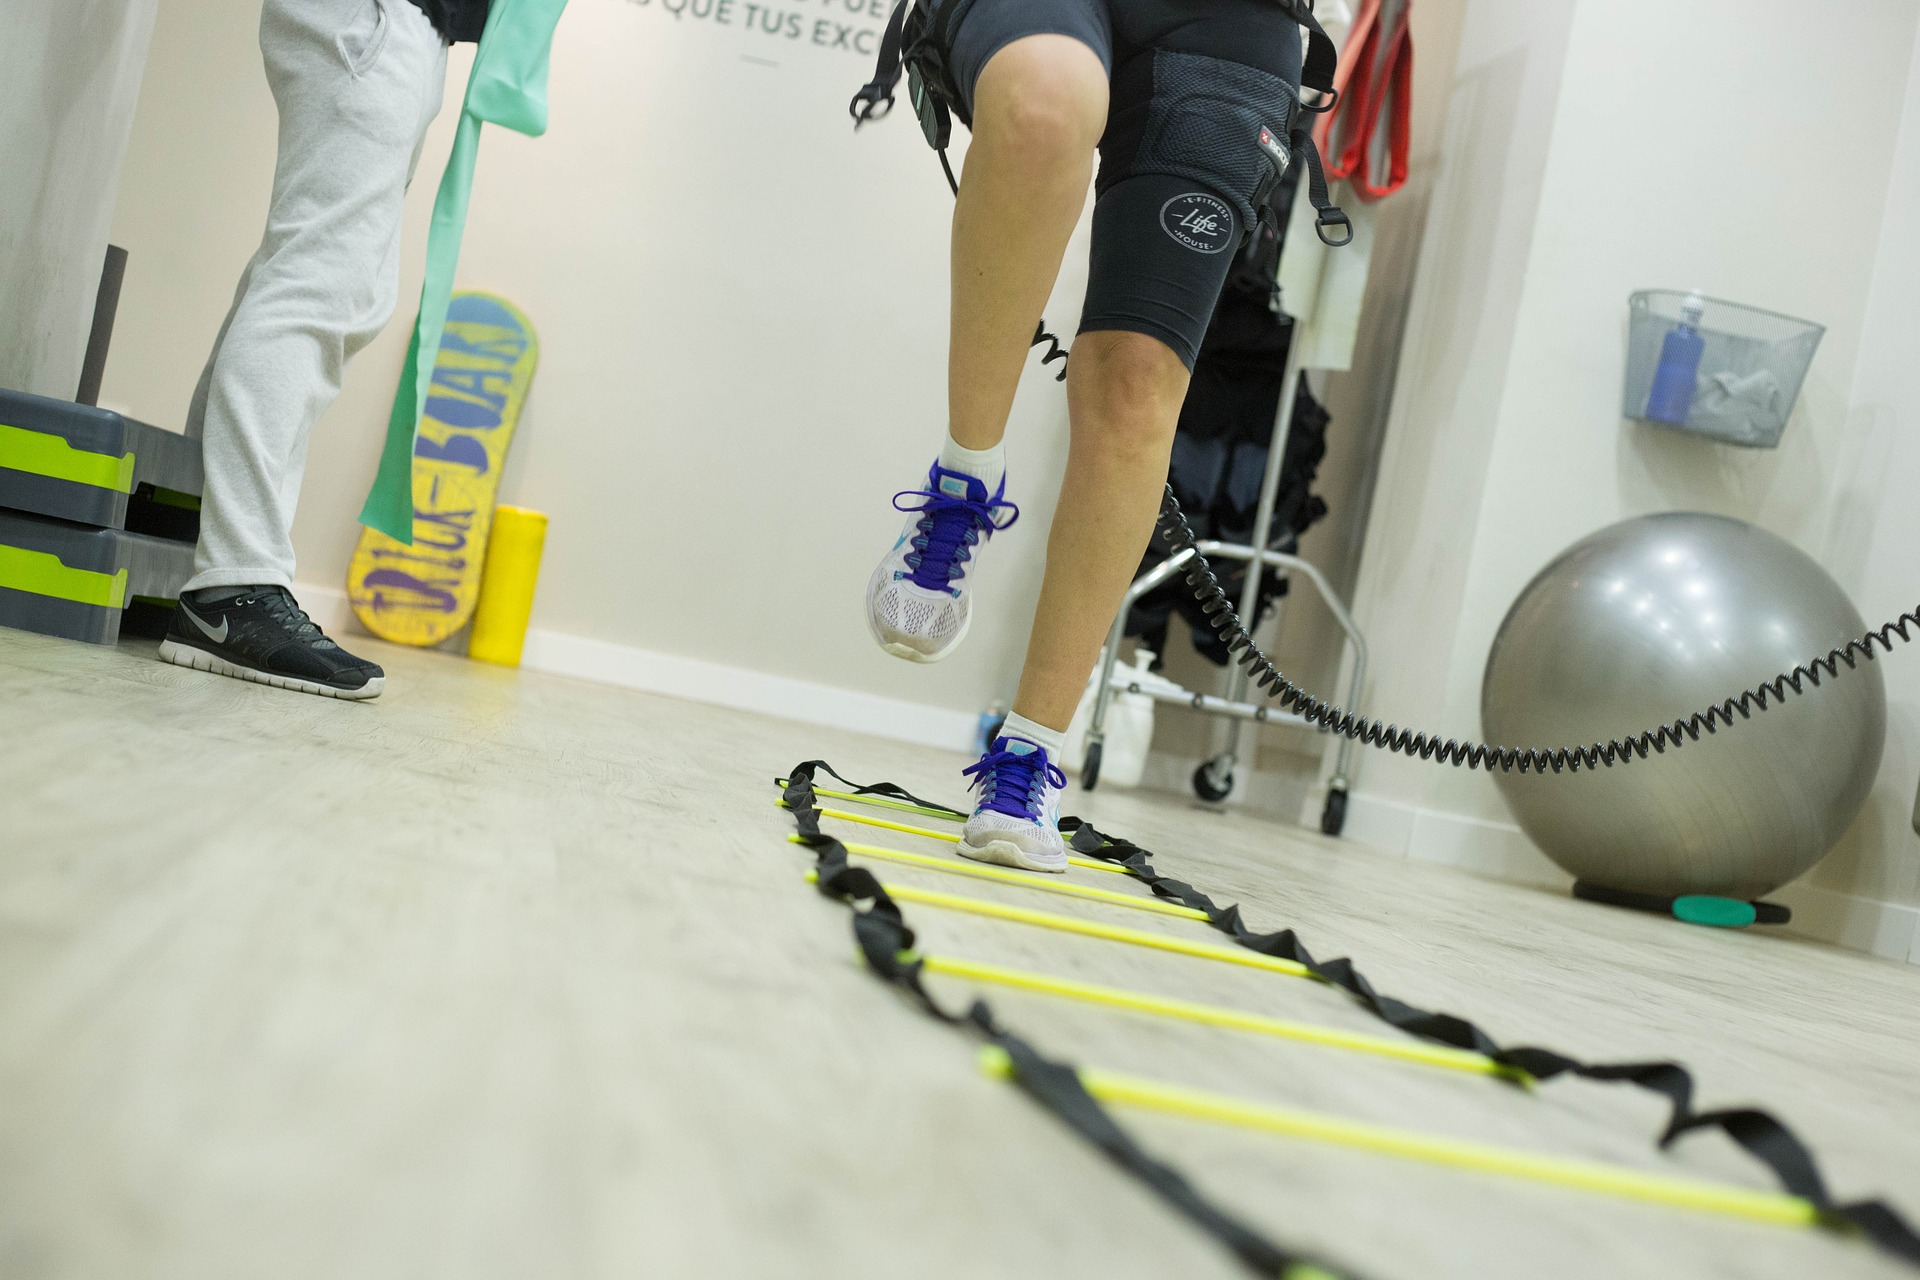 Rehabilitation courses for physiotherapists – an innovative NDT method